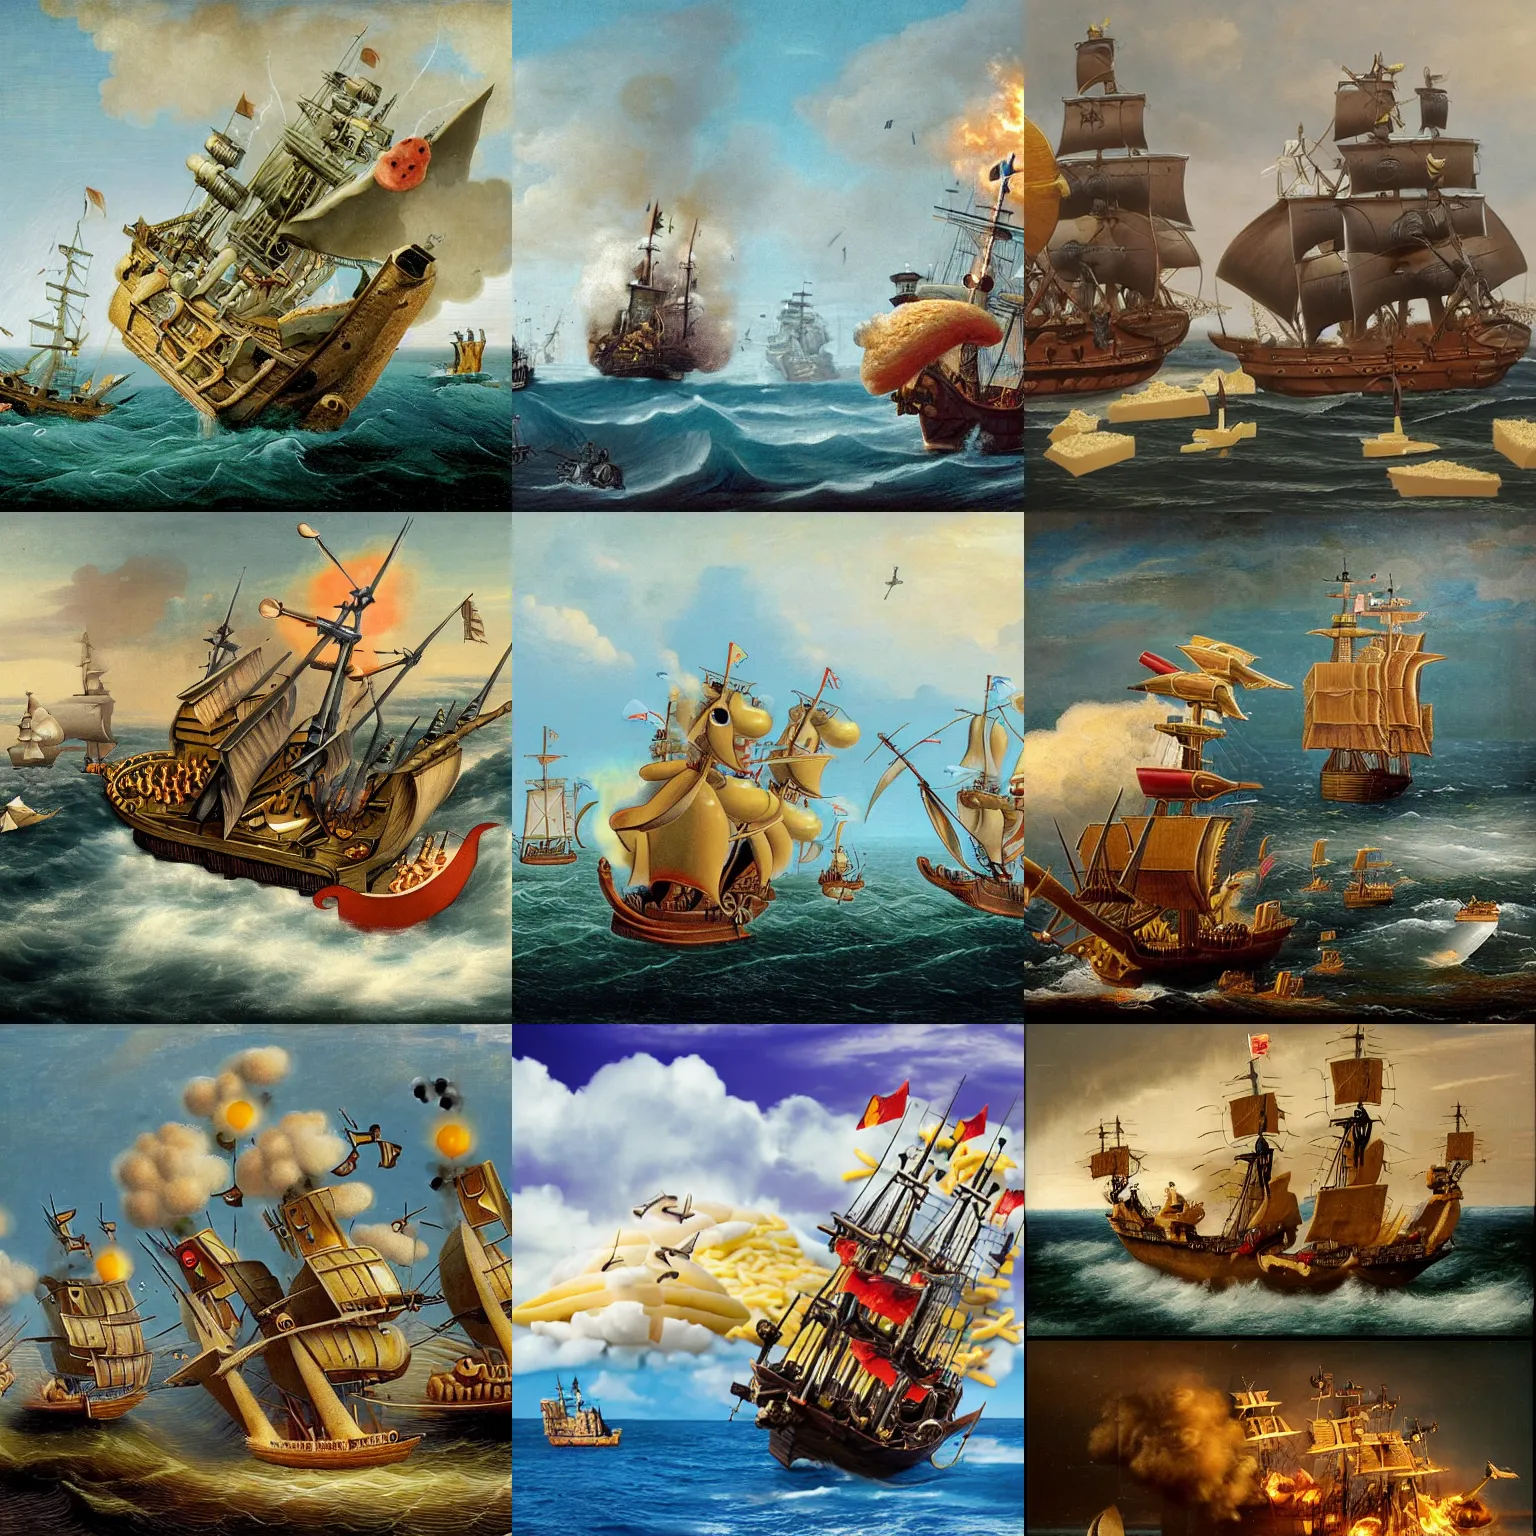 Prompt: a cannon battle between two ships at sea. the pirate ship is made out of cheese. the pirate ship fires olives as projectiles at the other ship, a merchant ship made out of bread.